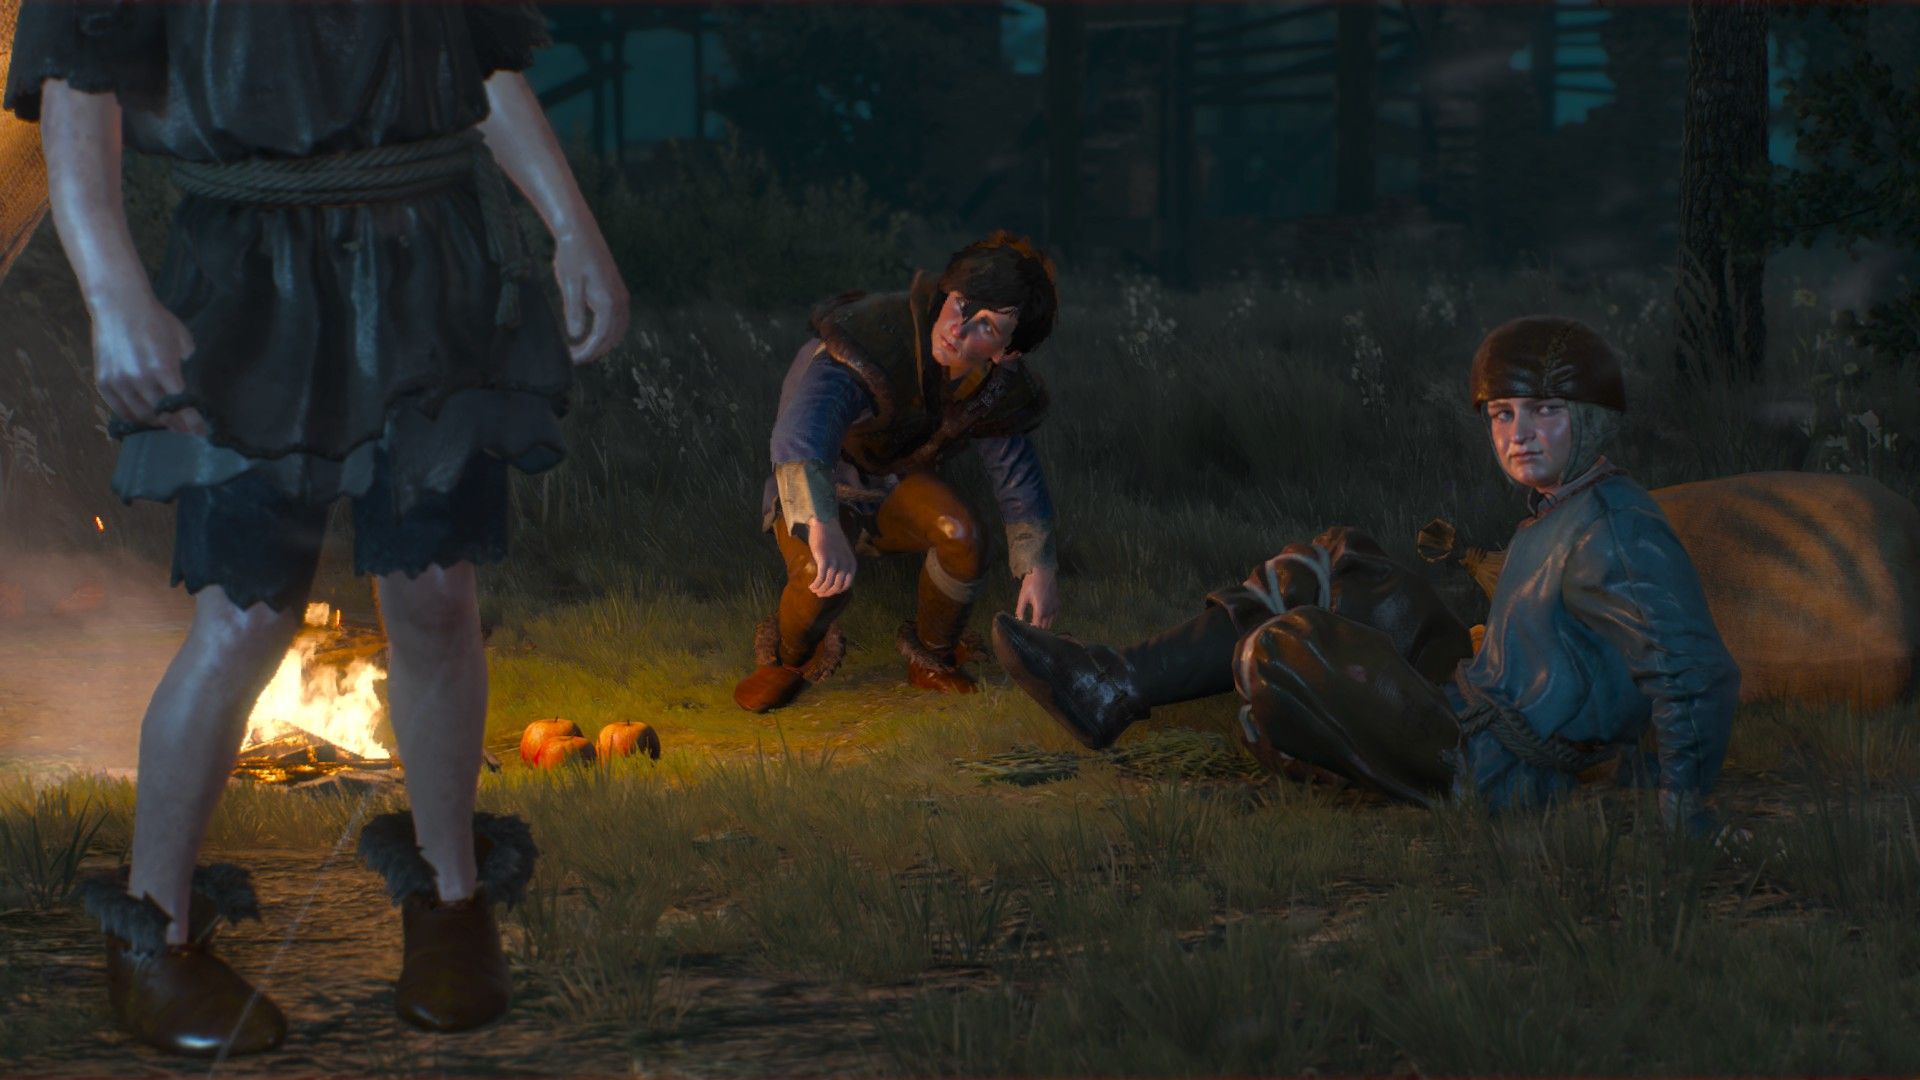 A trio of children rise to their feet next to a campfire in the woods at night.